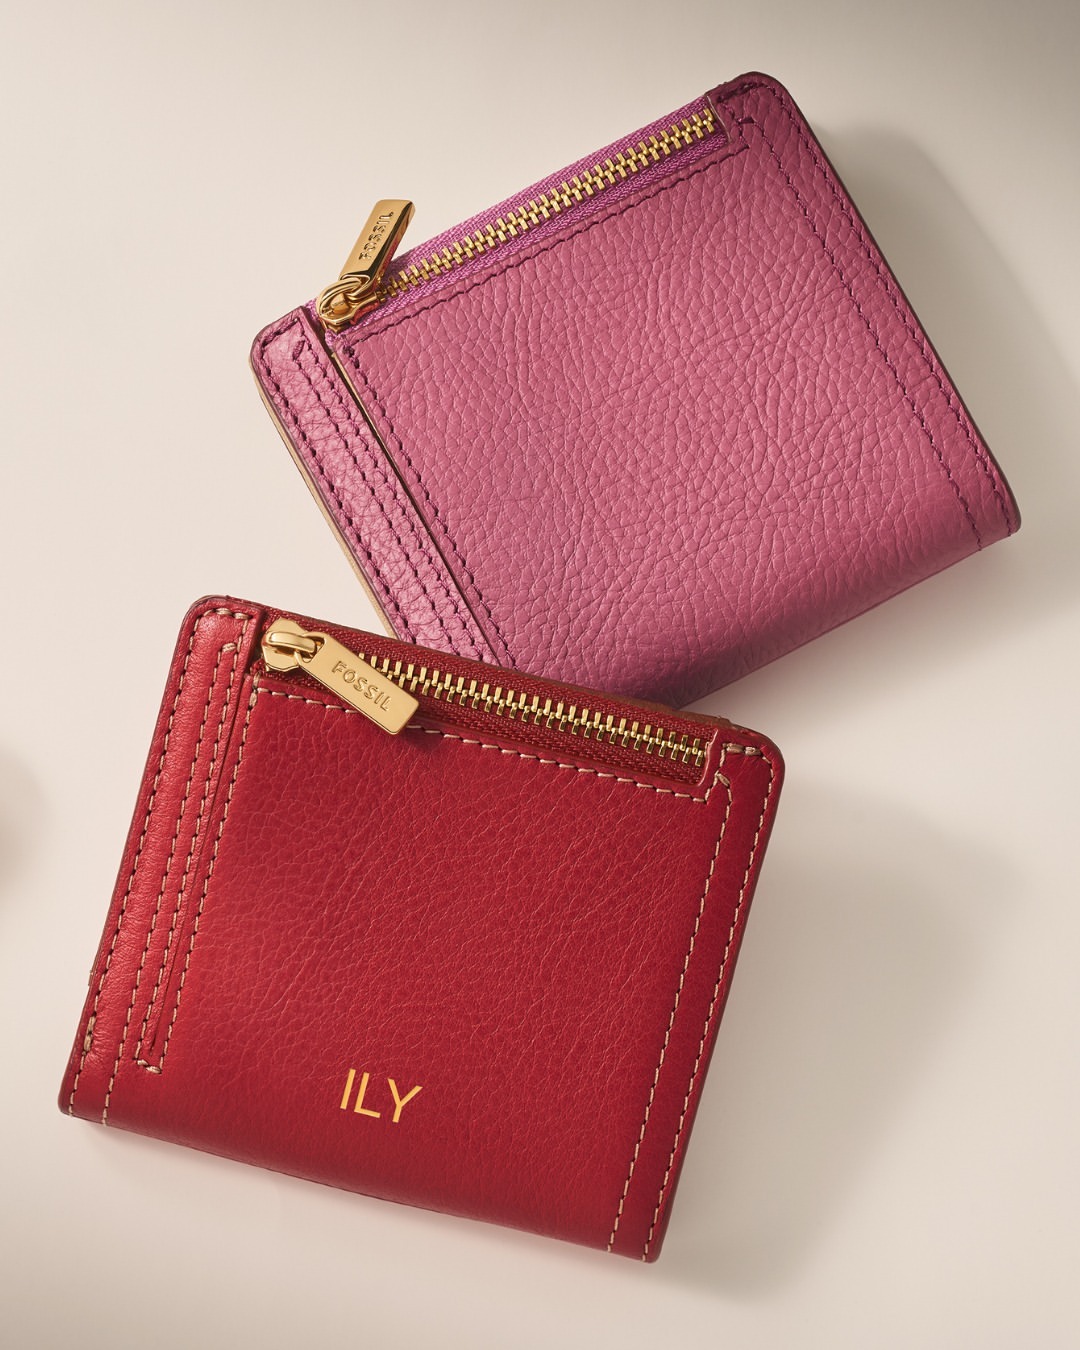 small pink wallet with gold zipper and small red wallet with gold zipper and embroidered "ILY"